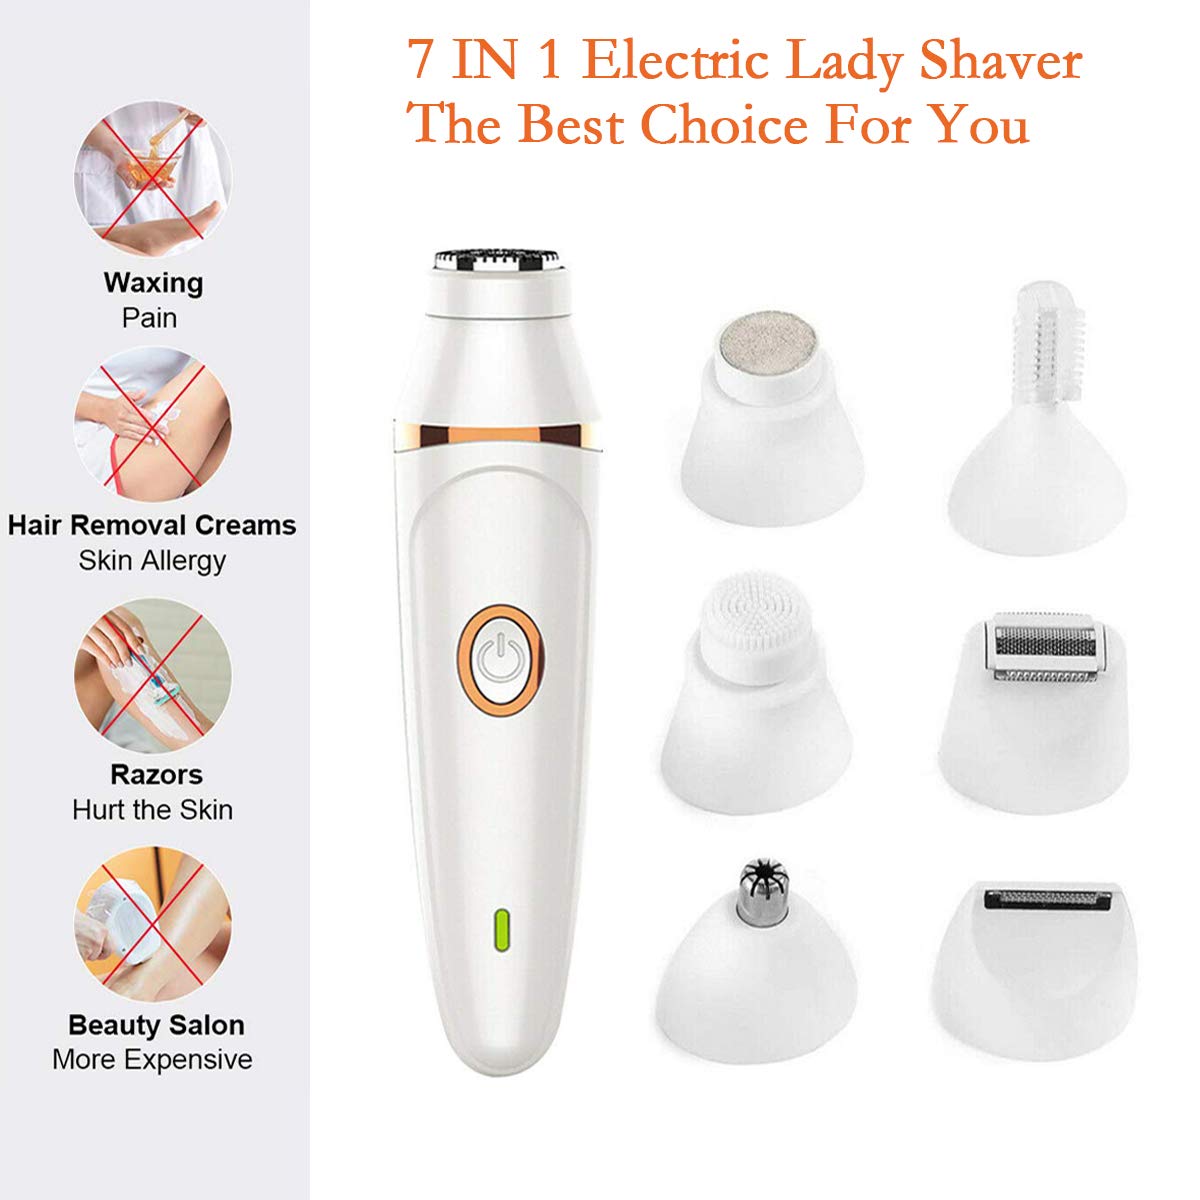 Electric Razor for Women,7 in 1 Painless Lady Shaver Set,Rechargeable Cordless Facial Hair Removal,Bikini Trimmer,for Face,Eyebrow,Nose, Underarm, Arms, Legs